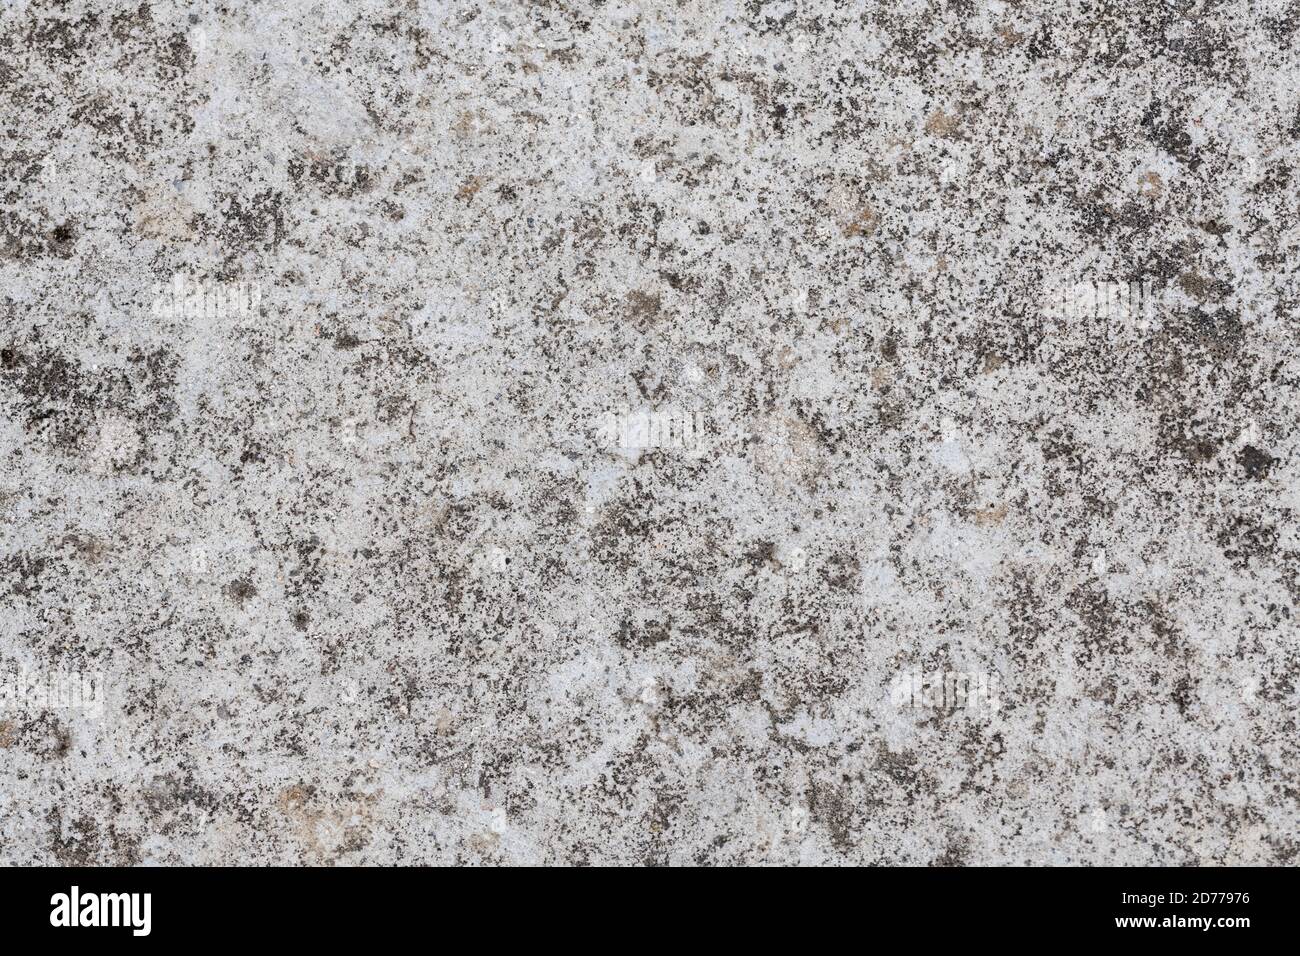 Smooth concrete cement surface stained by weathering mildews etc. Only laid down about 3 years ago. Gritty concrete surface texture. Stock Photo